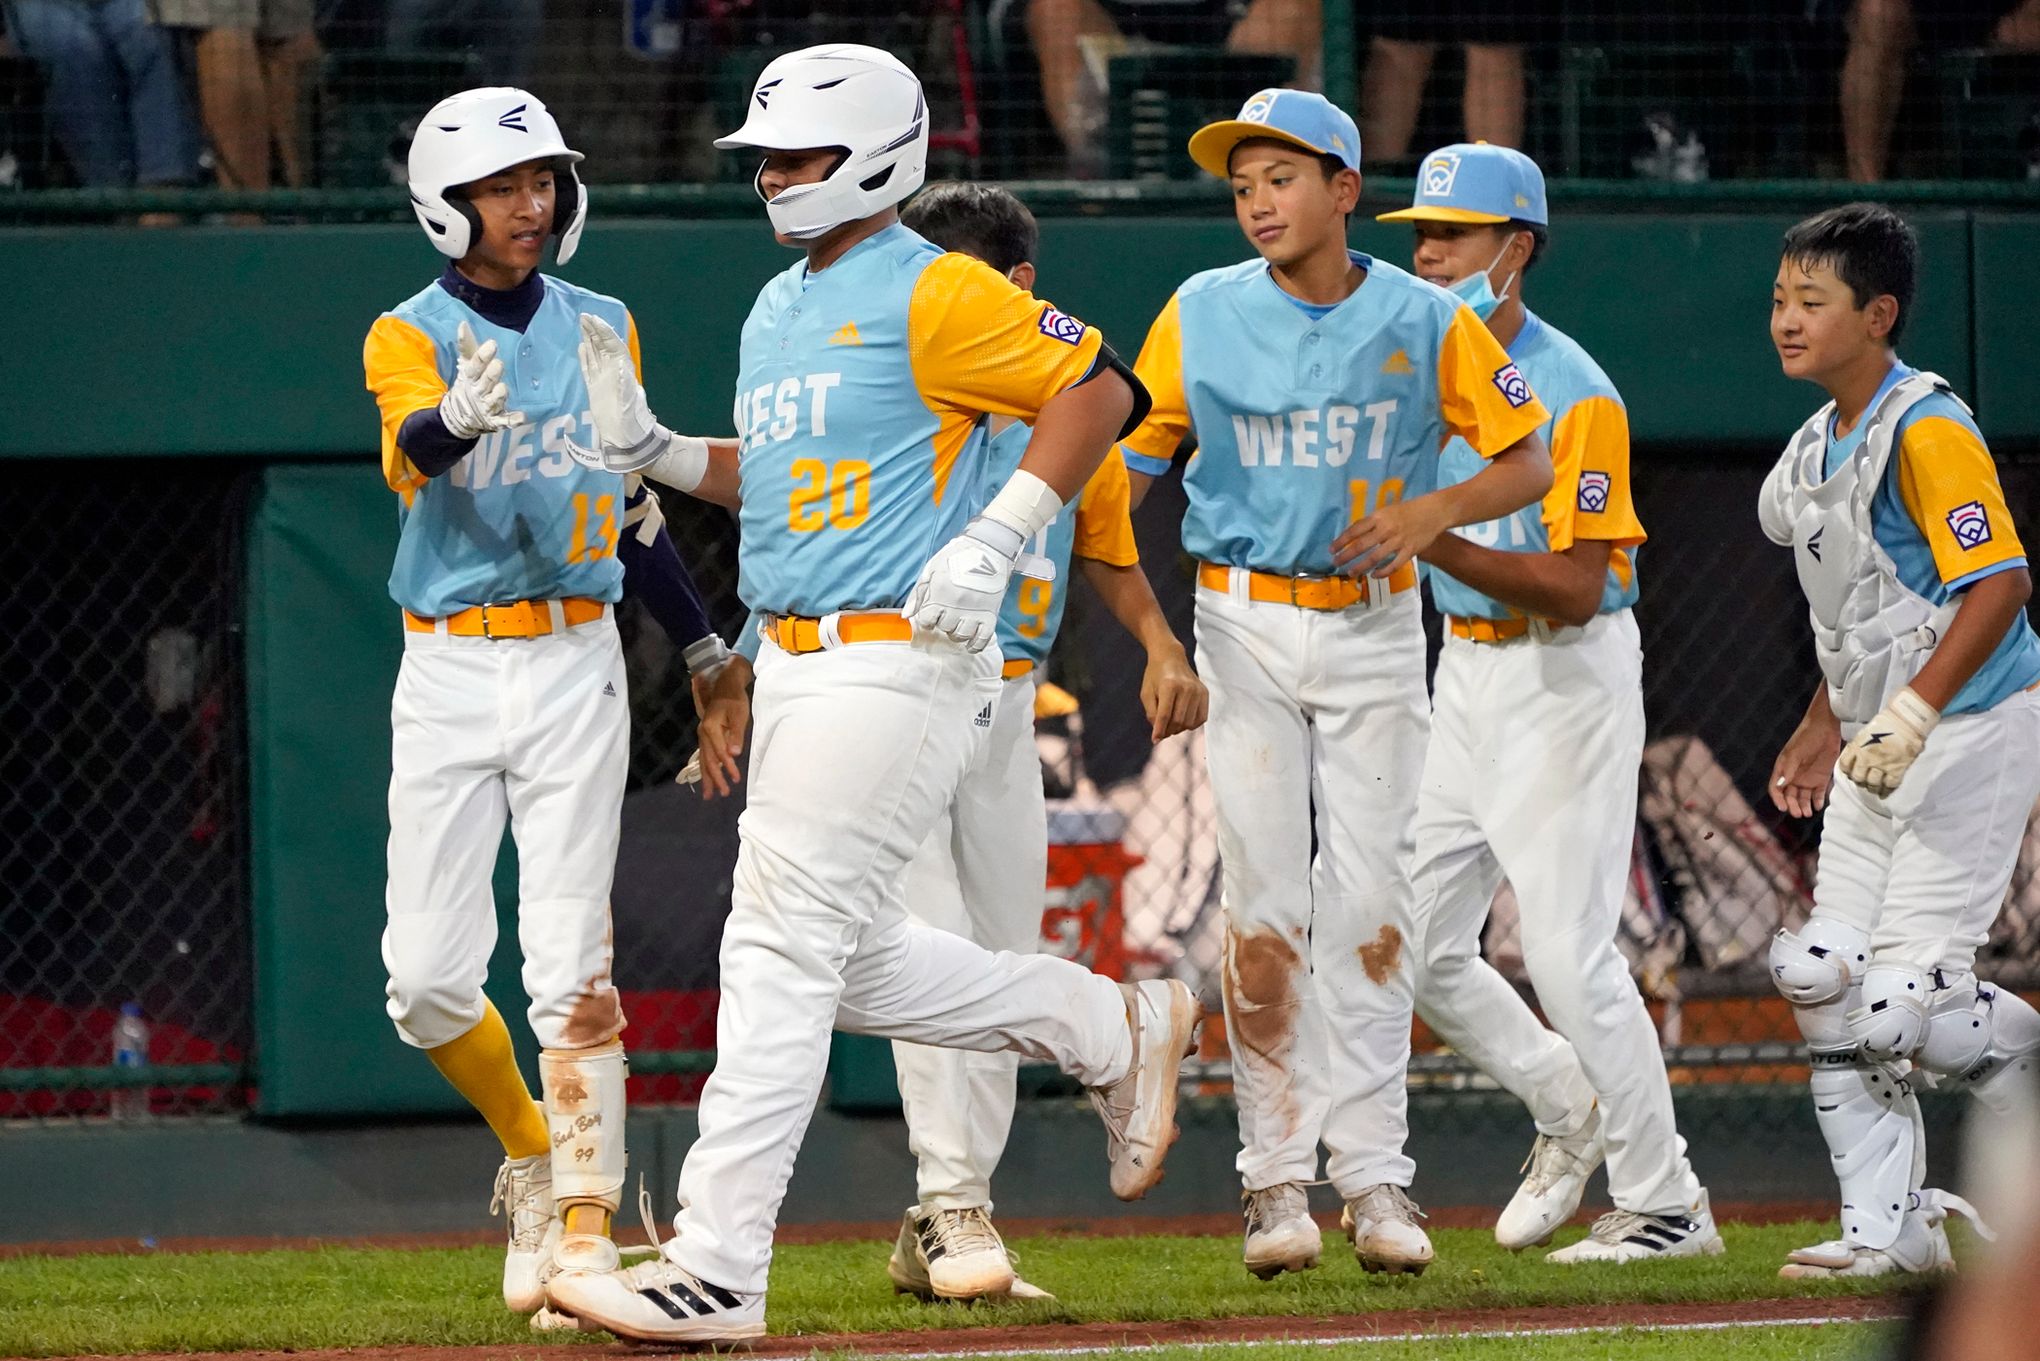 Hawaii off to strong start at Little League World Series